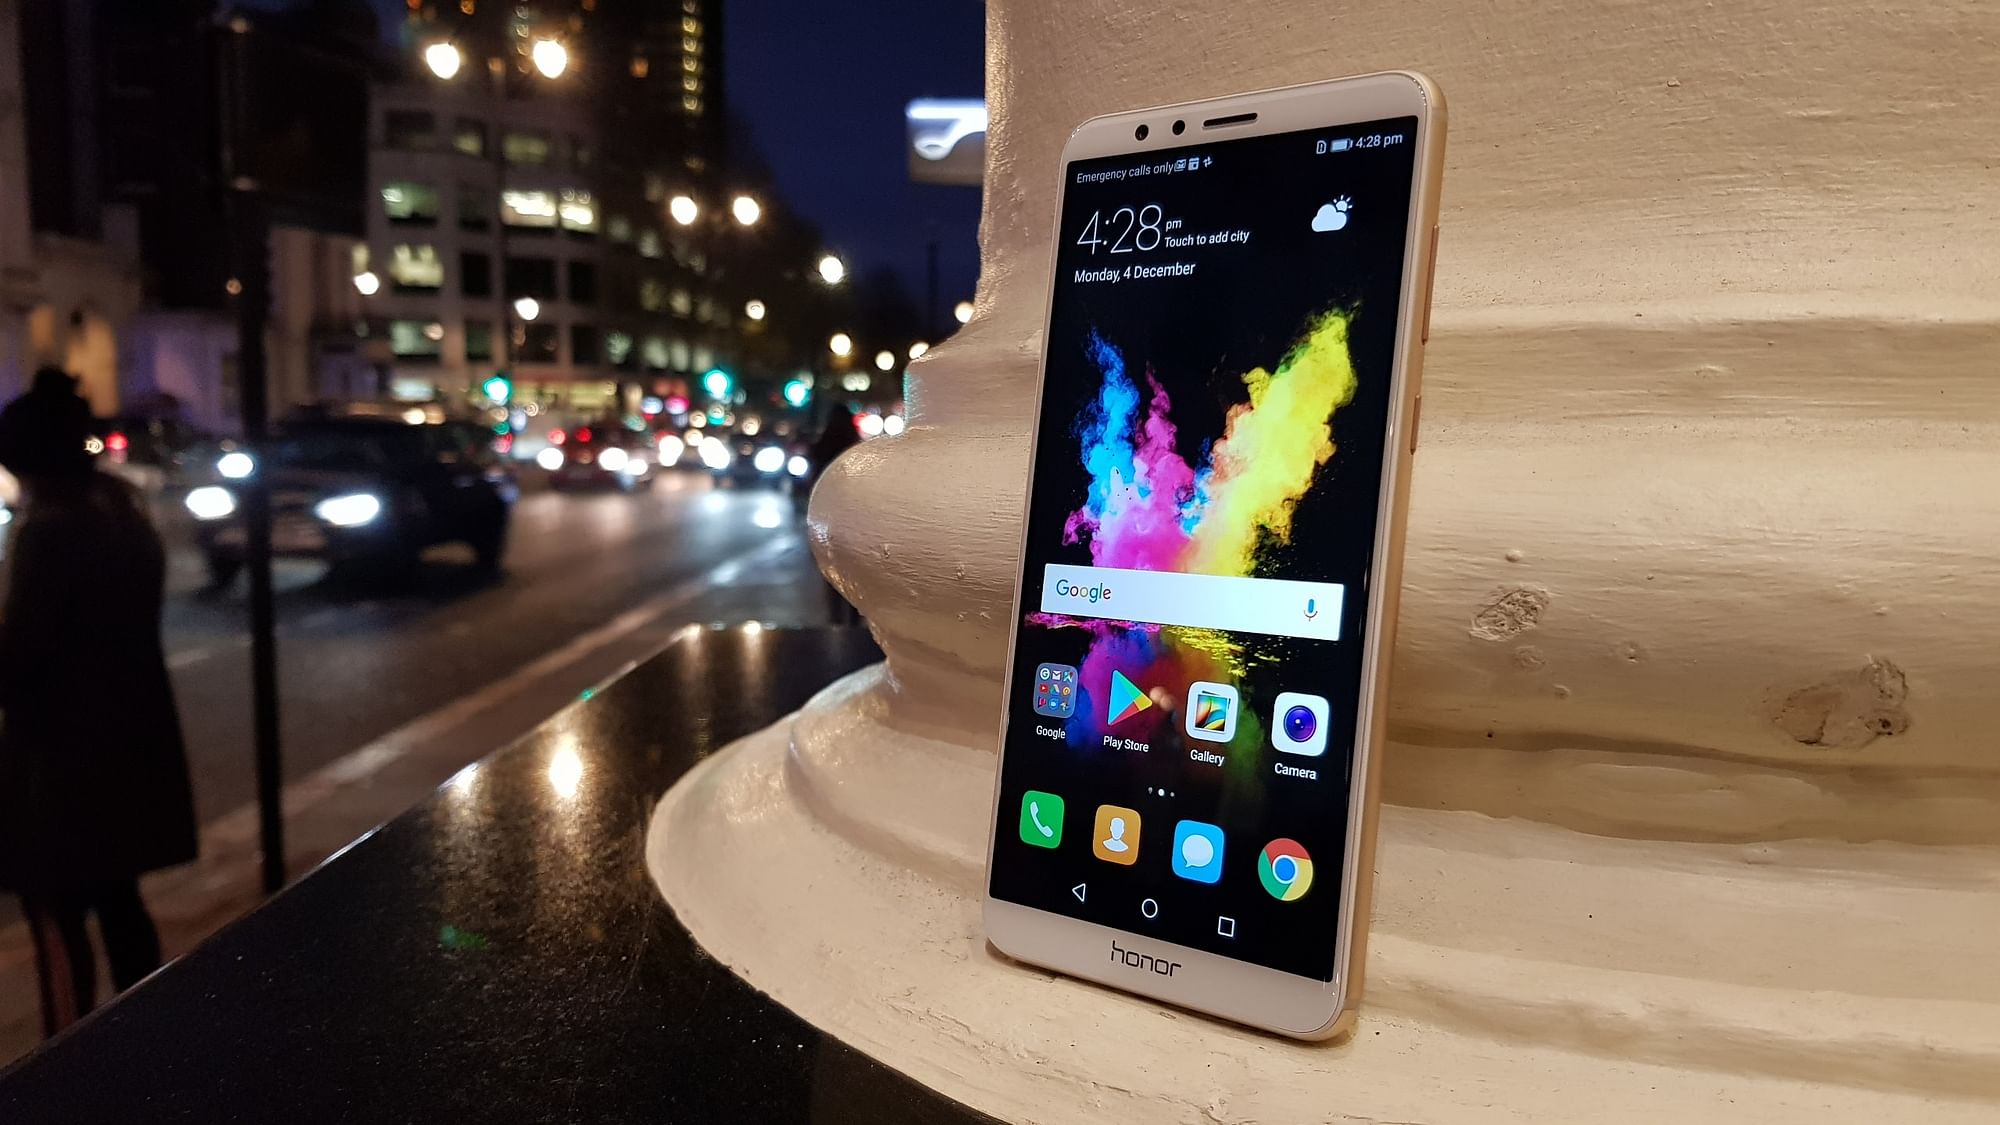 The Honor 7x comes with a Full HD display